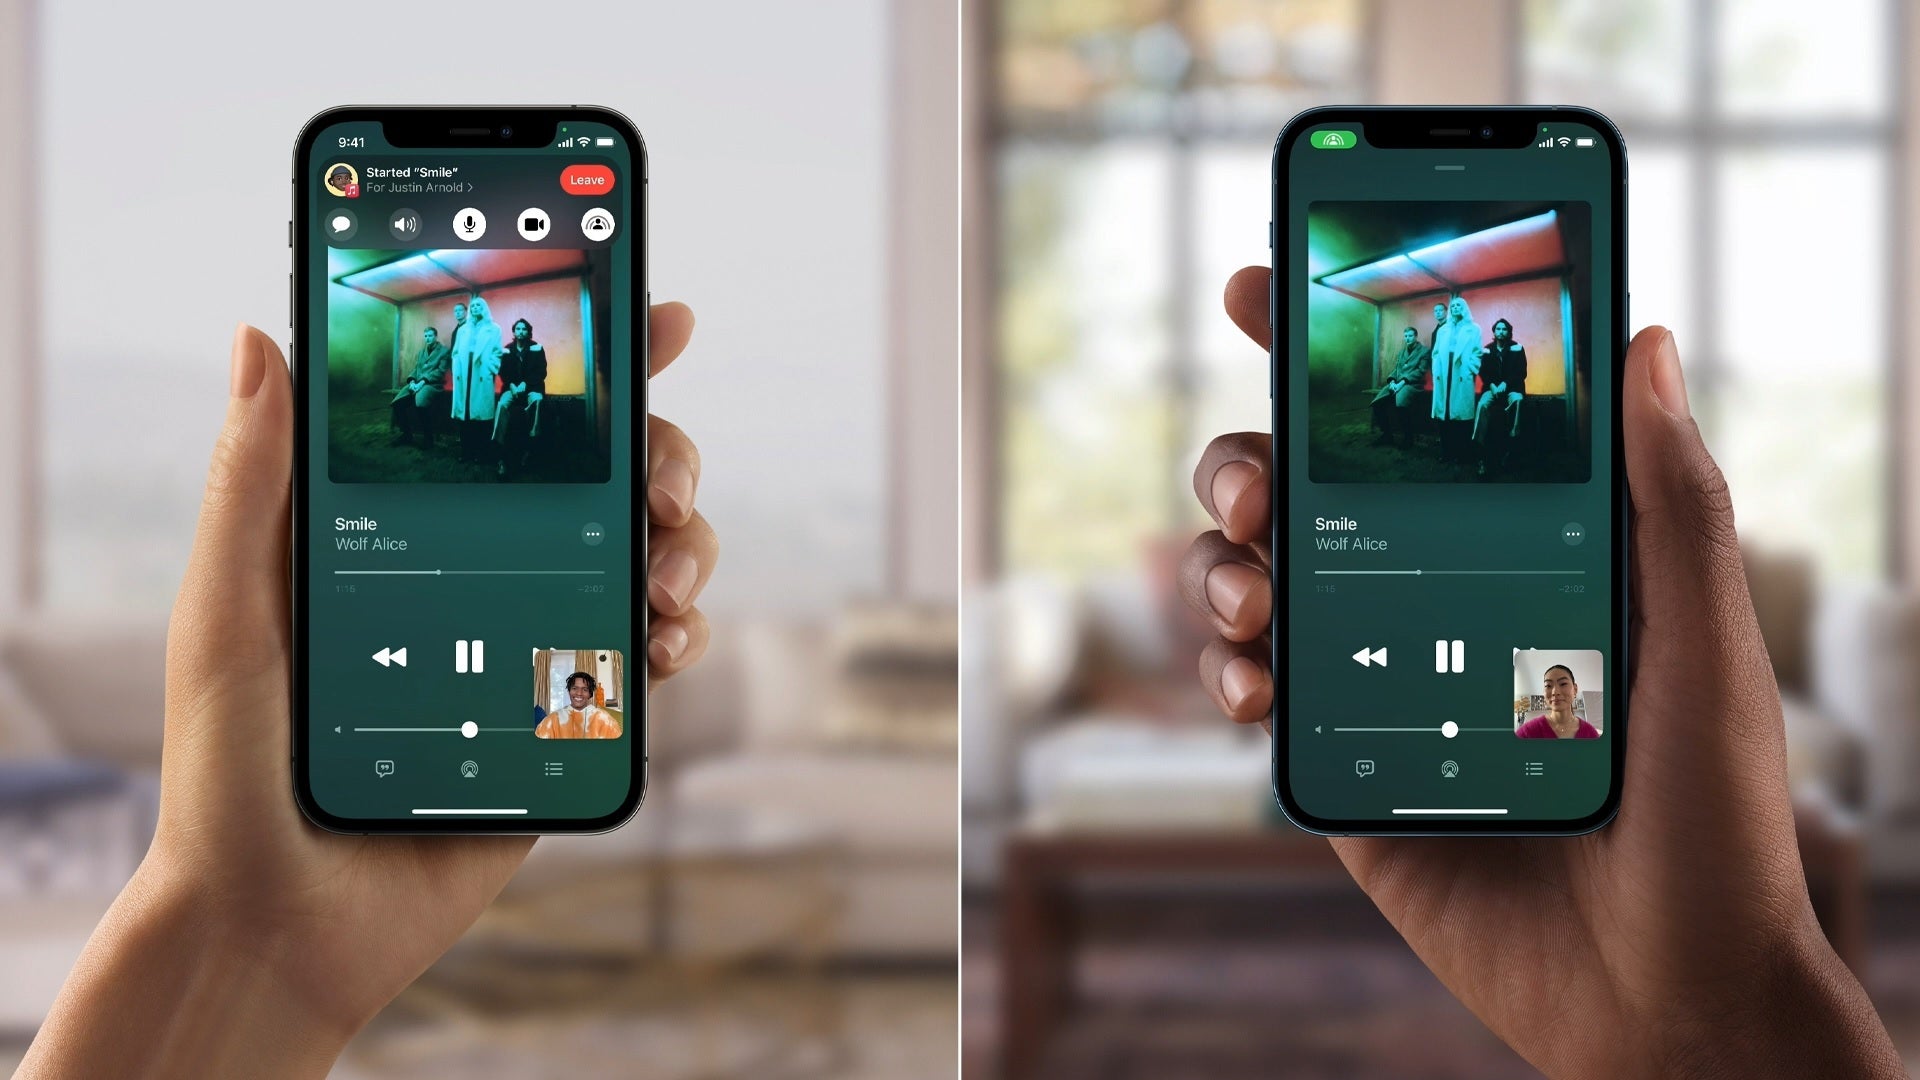 Sharing a tune over FaceTim - One day after iOS 15 is released, Apple pushes out iOS 15.1 beta